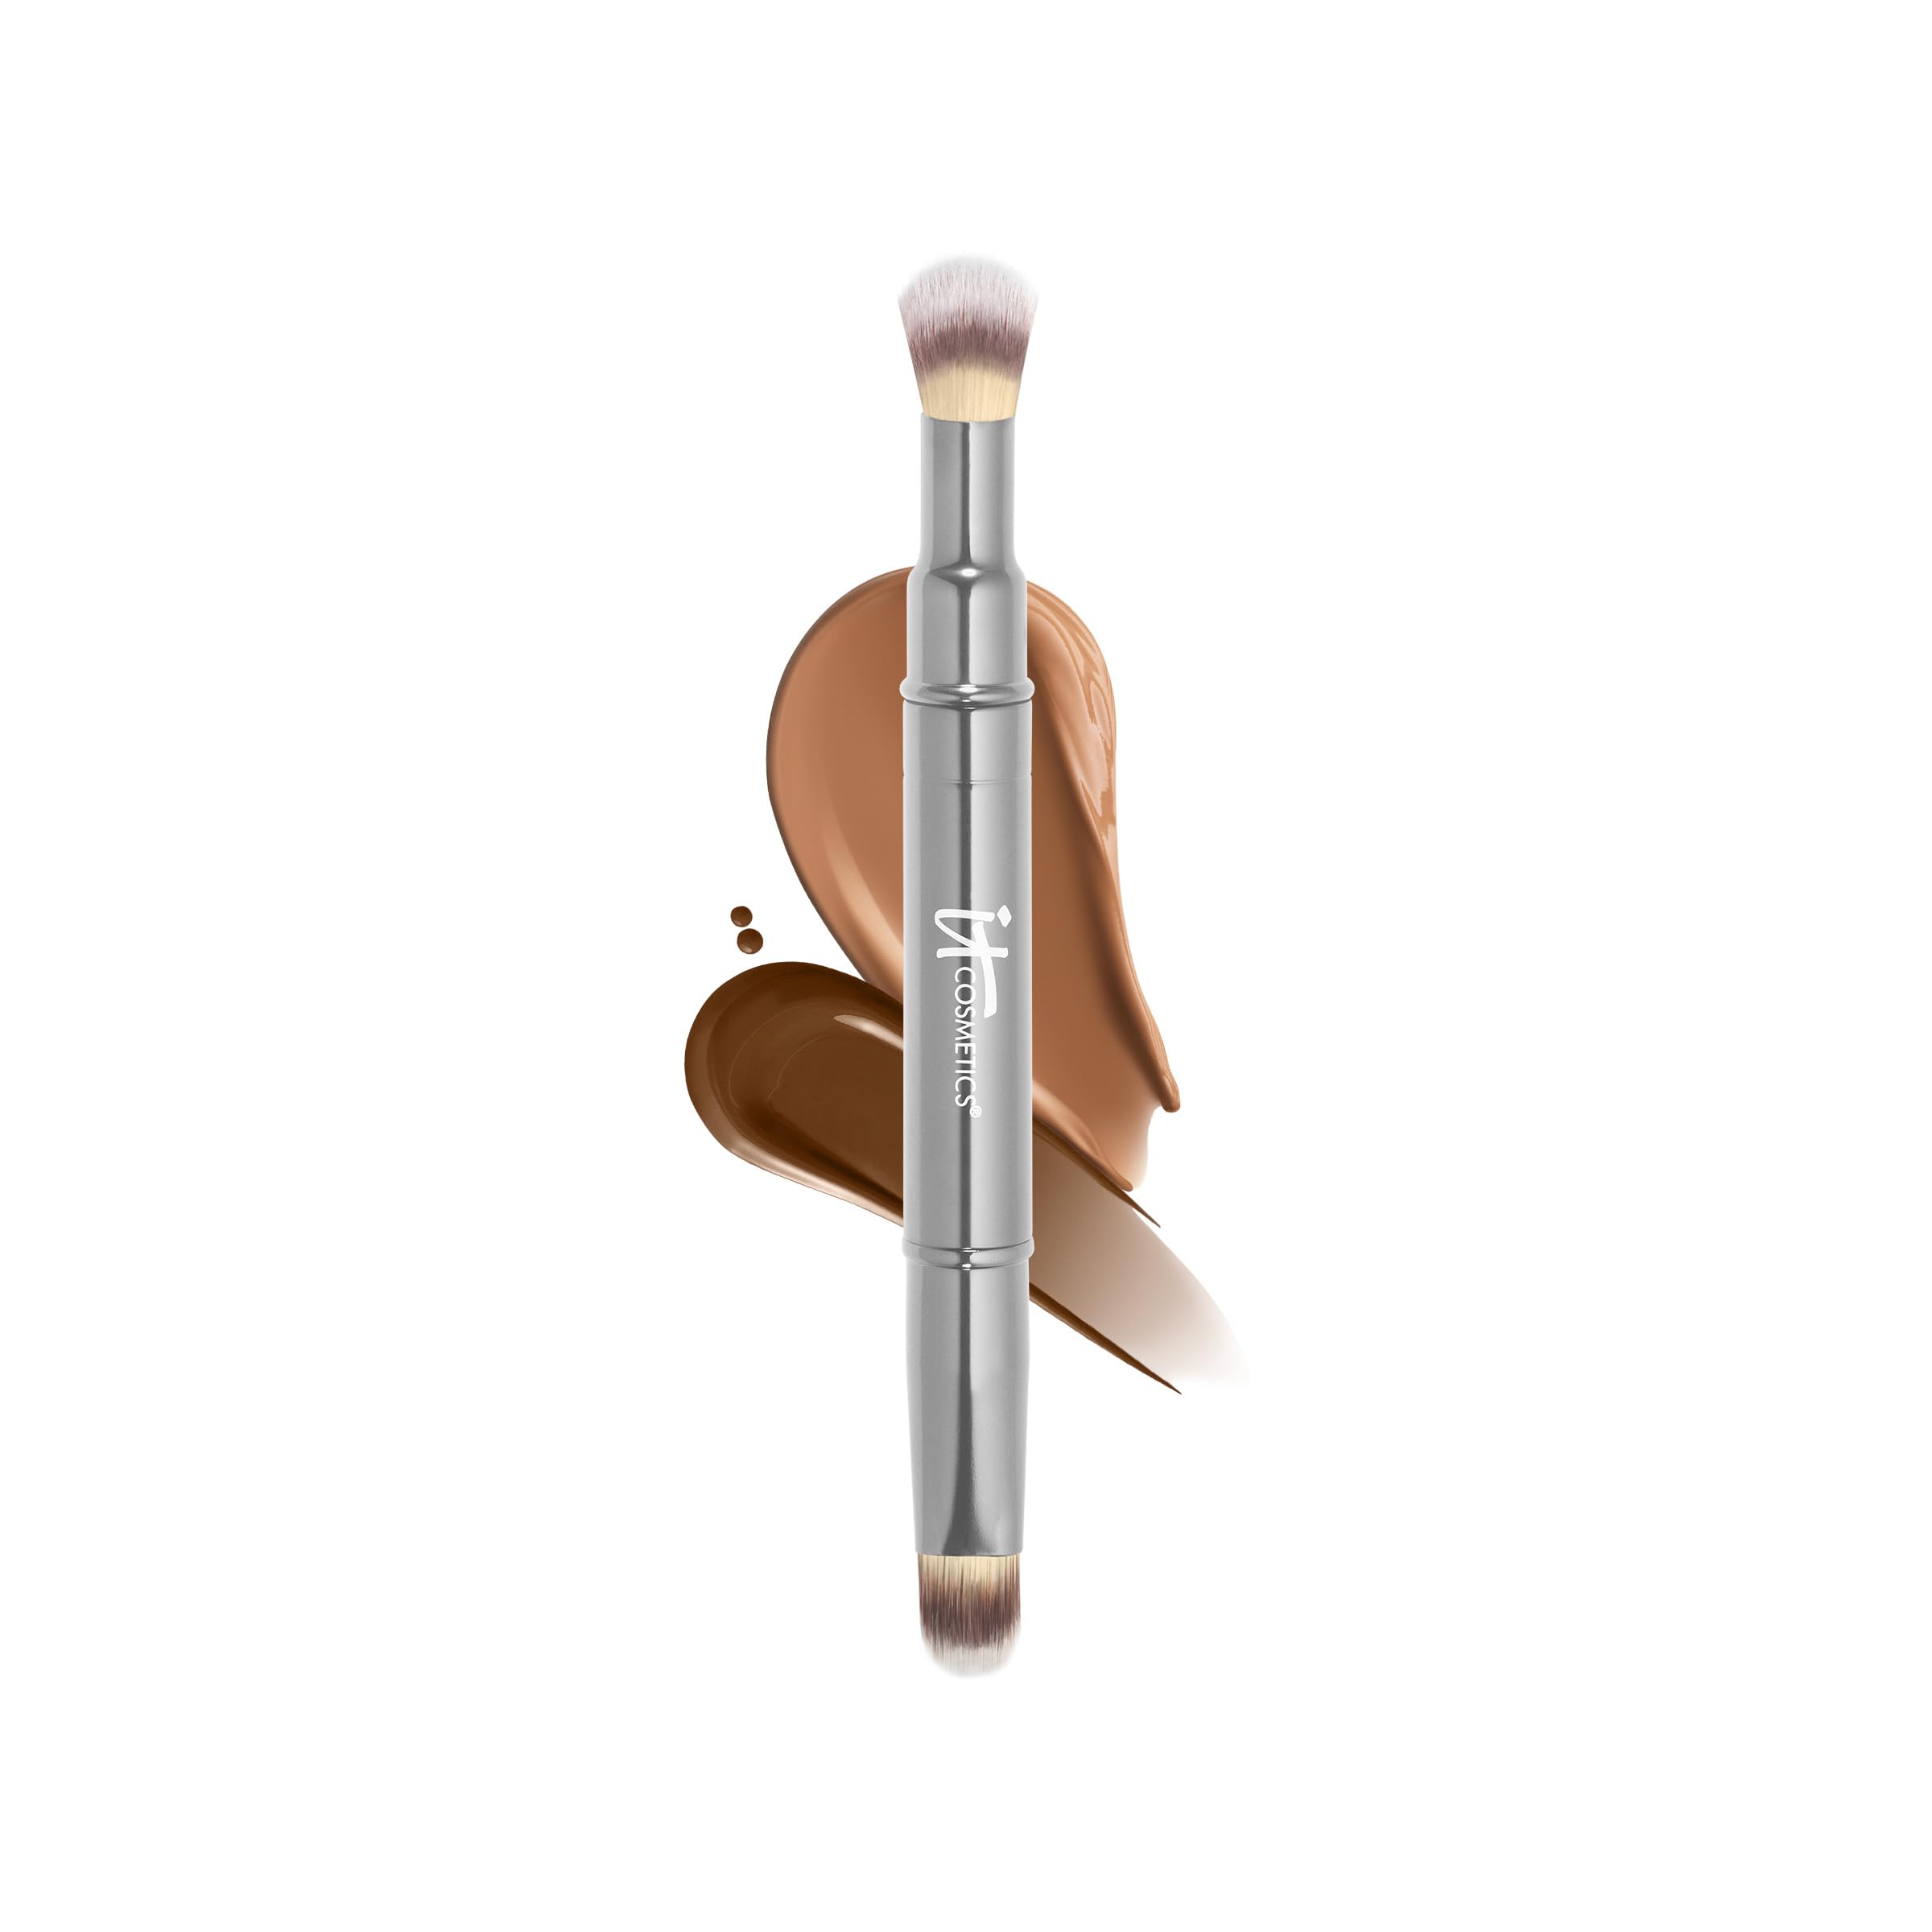 IT Cosmetics Heavenly Luxe Dual Airbrush Concealer Brush #2 - Dual-Ended, 2-in-1 Brush for Liquid & Cream Concealer - Buff Away Imperfections - With Award-Winning Heavenly Luxe Hair